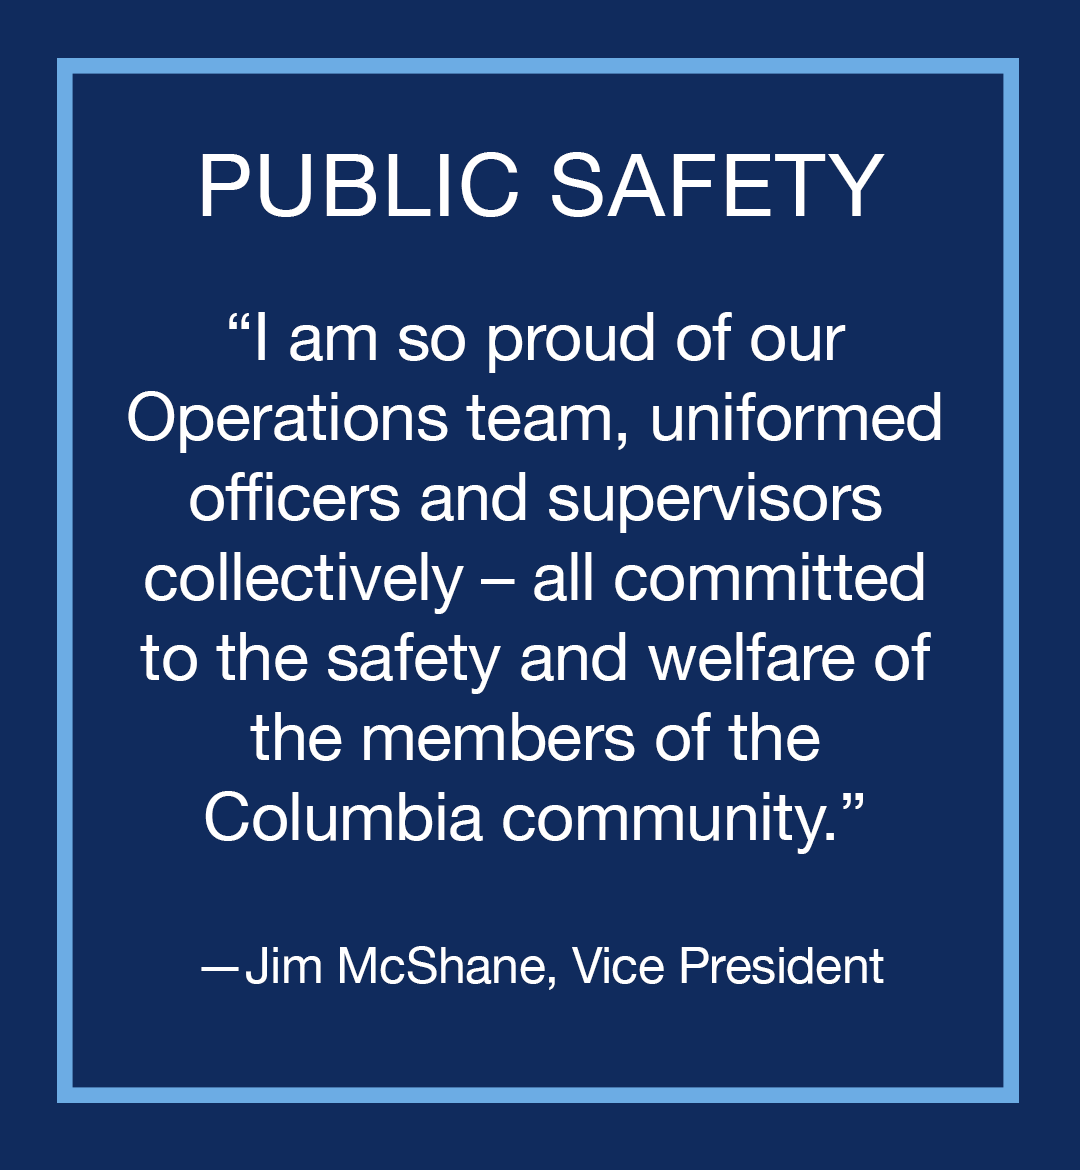 Image with text: Public Safety, "I am so proud of our Operations team, uniformed officers and supervisors collectively – all committed to the safety and welfare of the members of the Columbia community," Jim McShane, Vice President